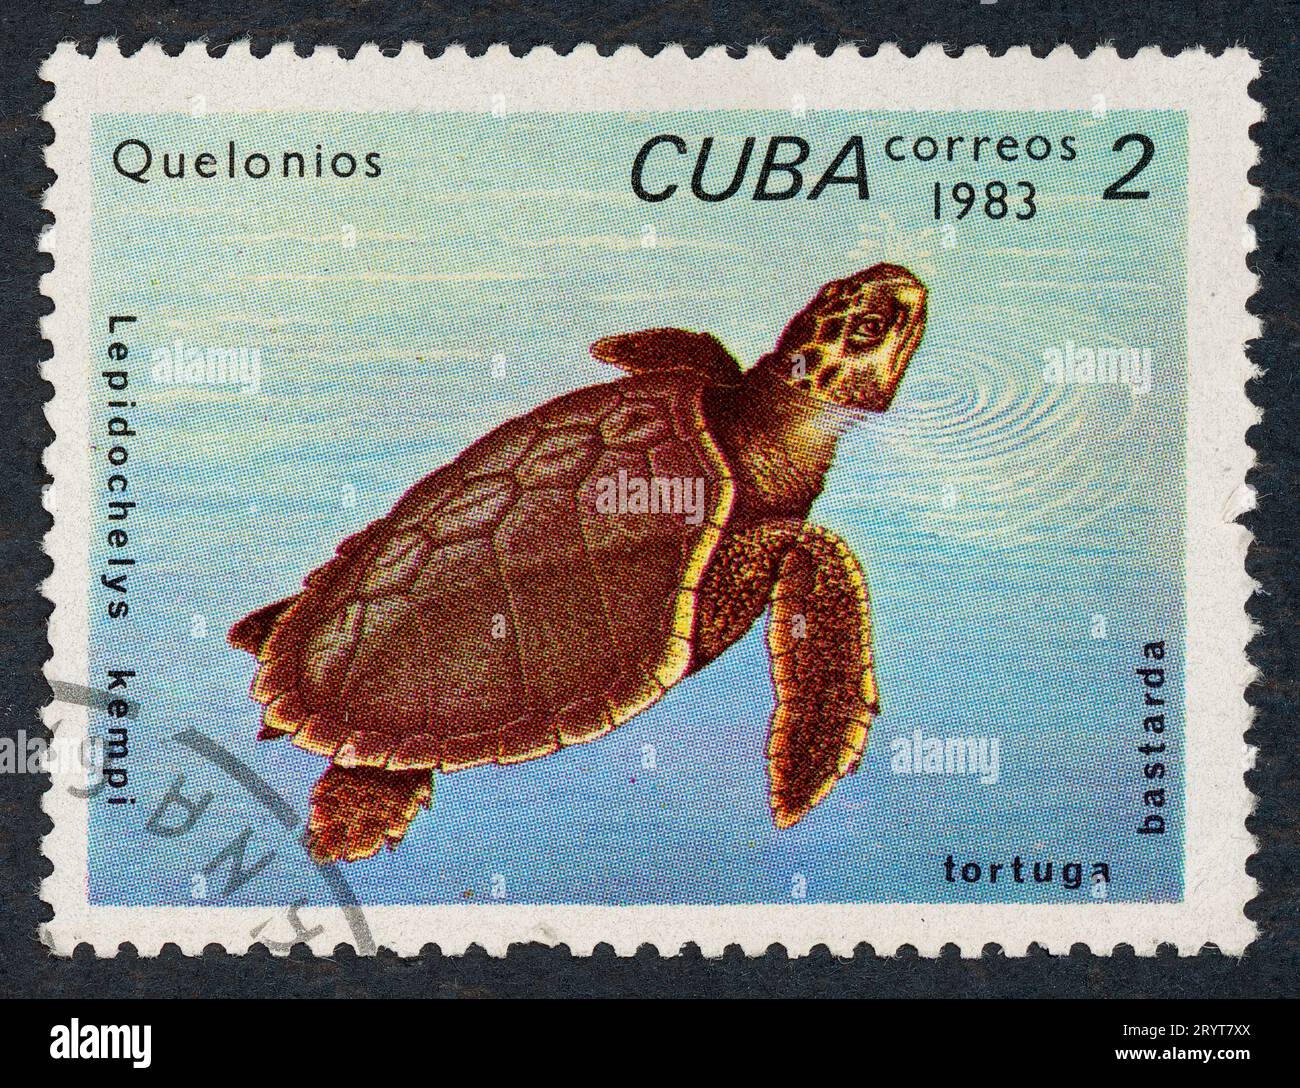 Kemp's ridley sea turtle (Lepidochelys kempii), also called the Atlantic ridley sea turtle. 'Quelonios' – Turtles. Postage stamp issued in Cuba in 1983. Stock Photo